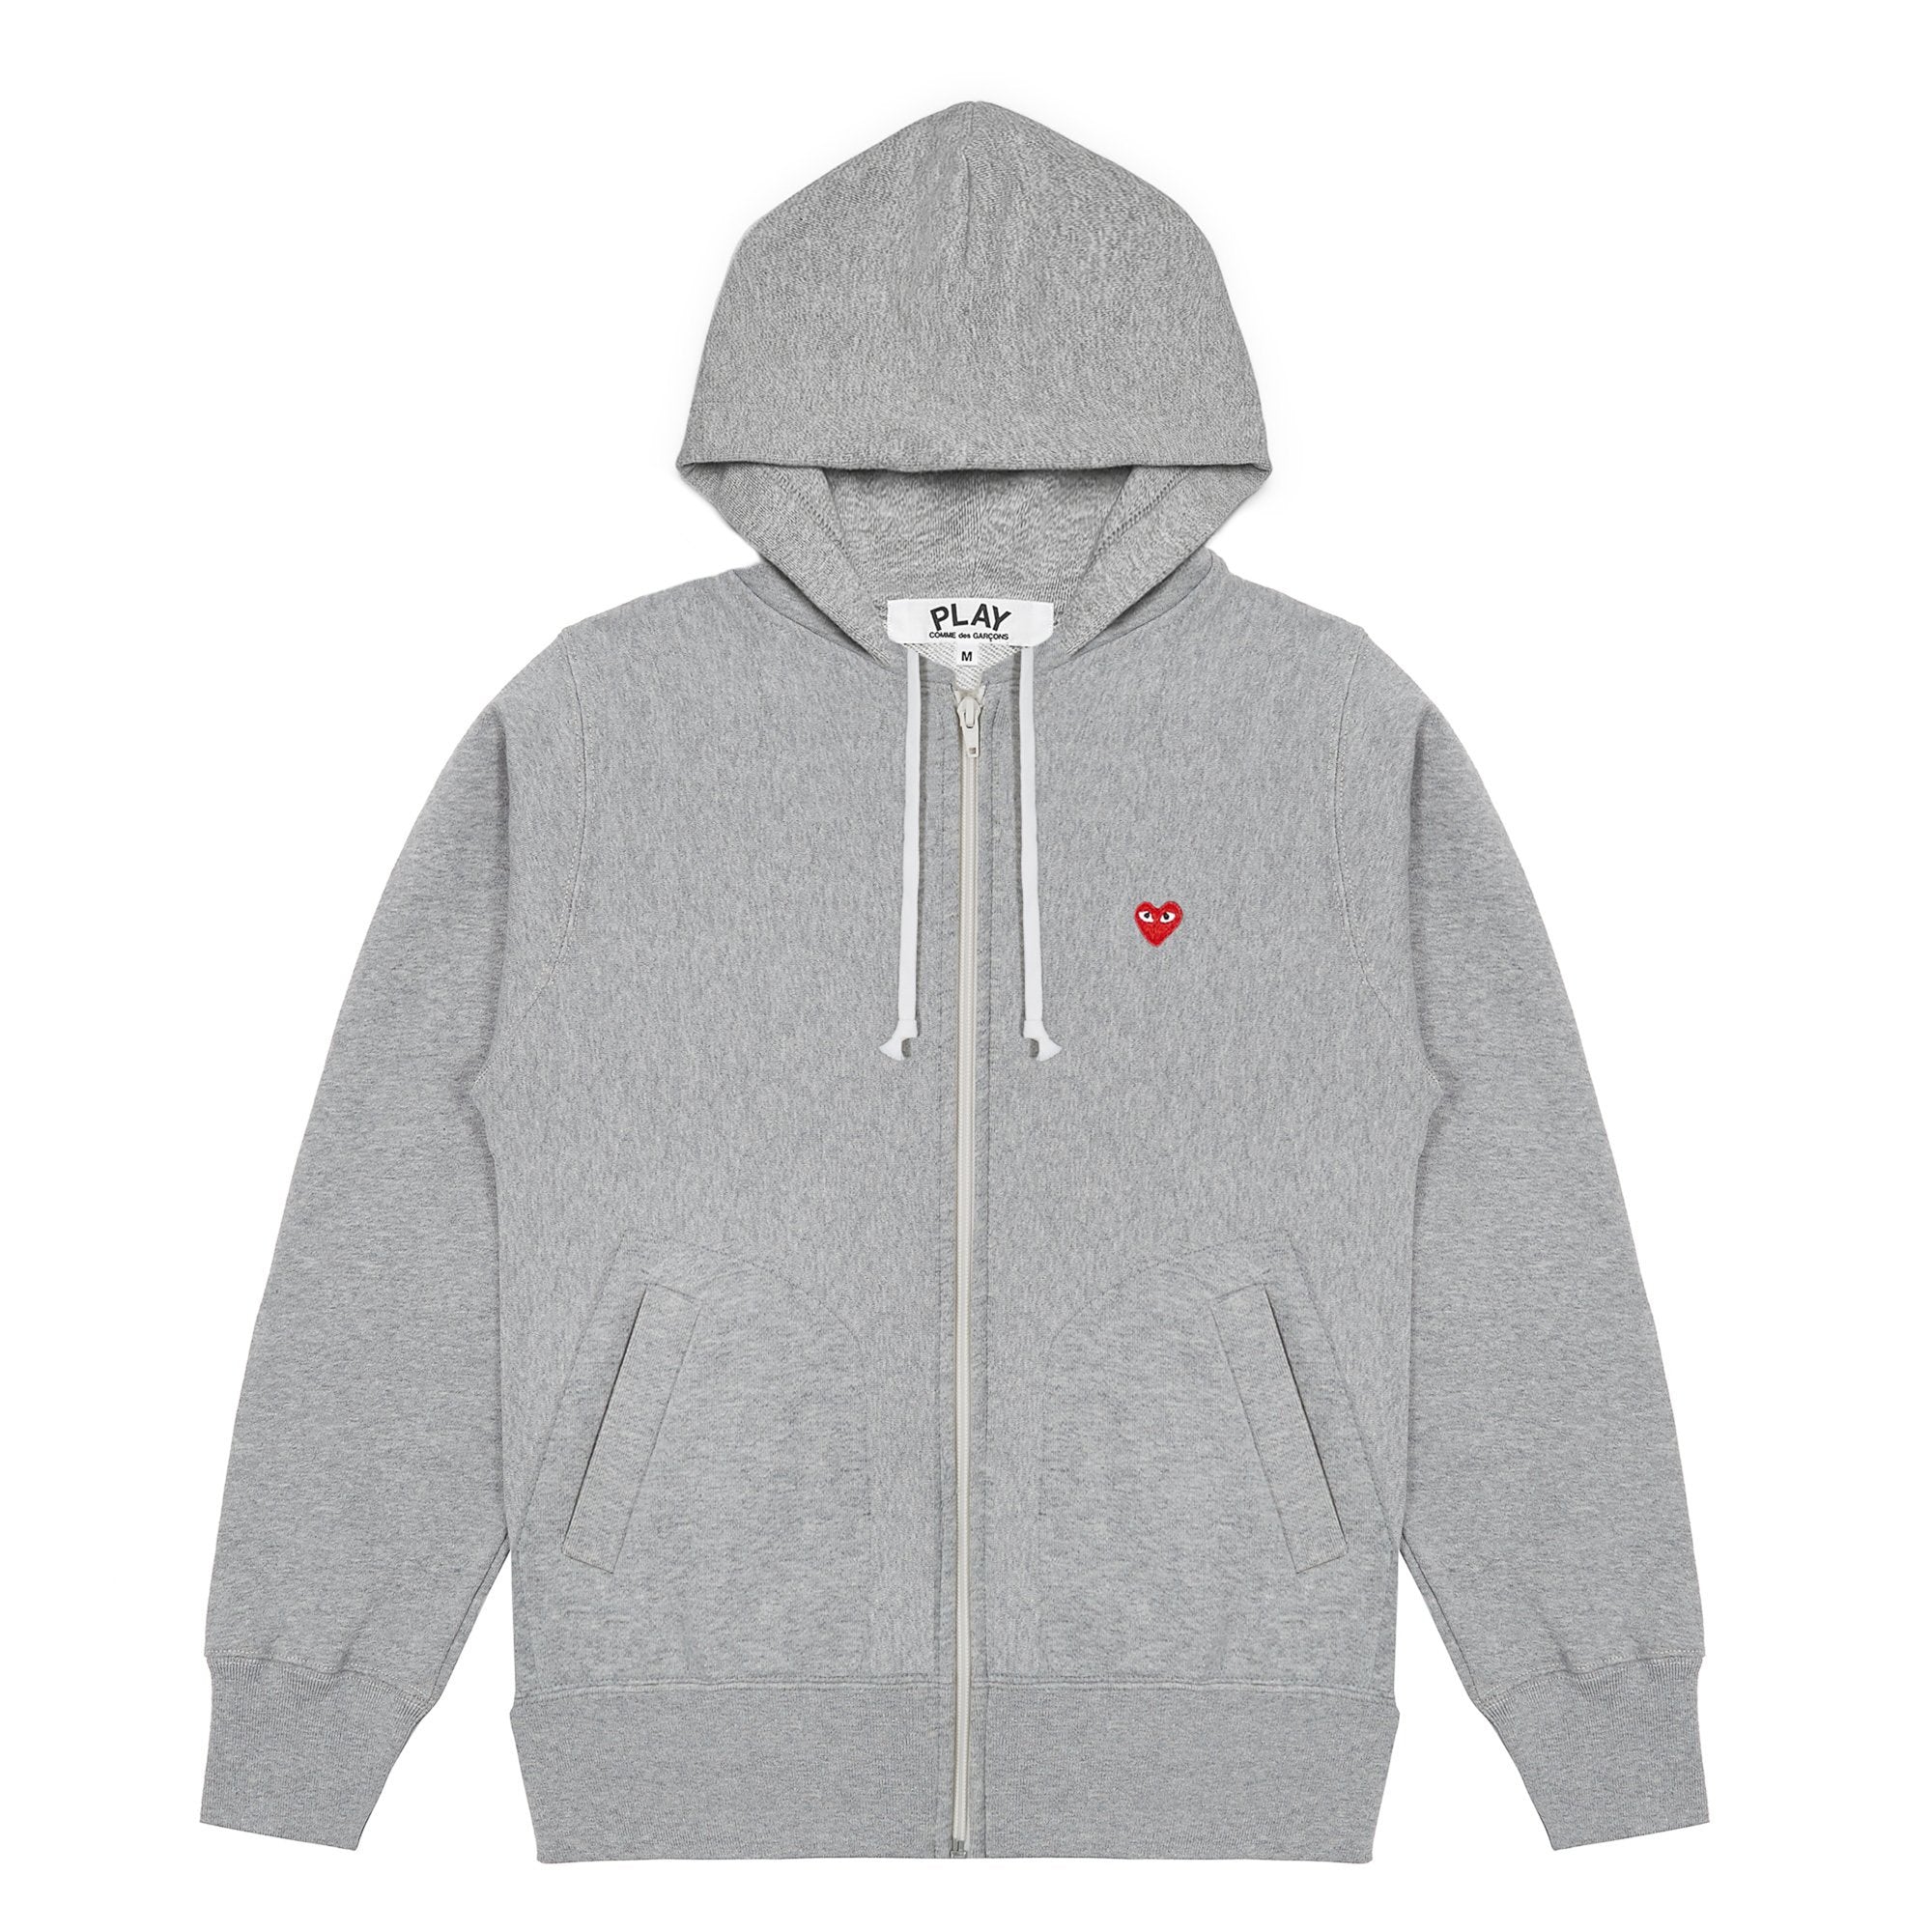 PLAY CDG - HOODED SWEAT SHIRT WITH SMALL RED HEART - (TOP GREY) view 1